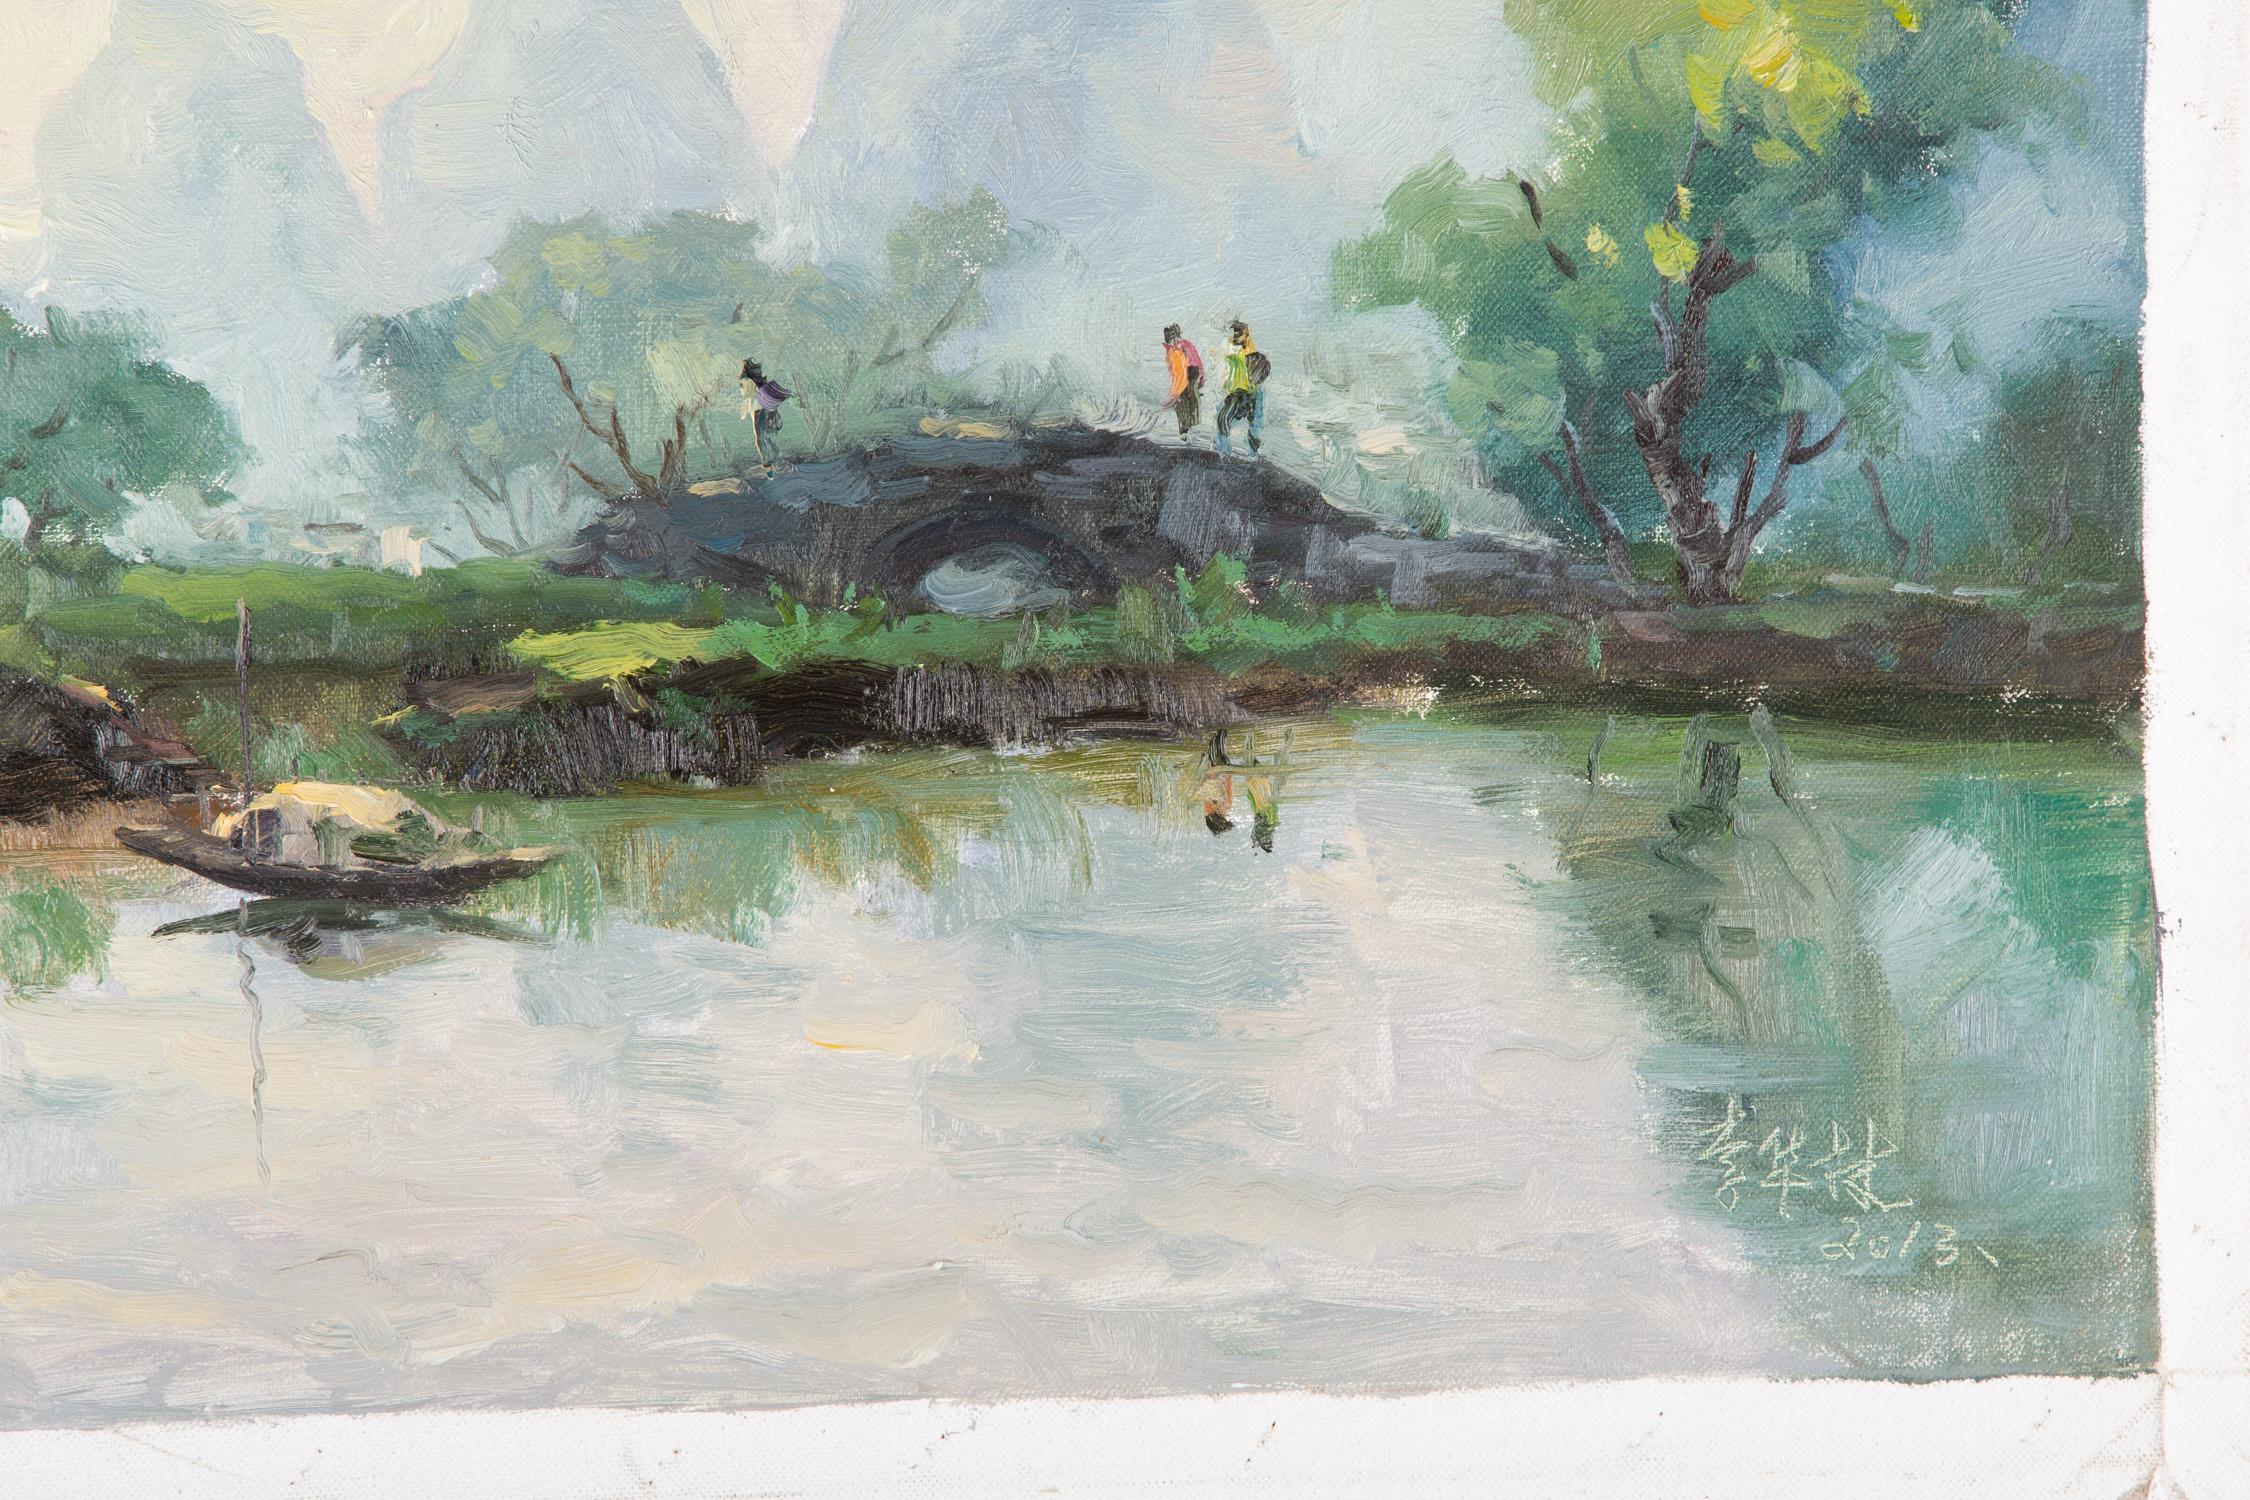  Title: Bridge Over The Lake
 Medium: Oil on canvas
 Size: 27.5 x 19.5inches
 Frame: Framing options available!
 Age: 2000s
 Condition: Painting appears to be in excellent condition.
 Note: This painting is unstretched
 Artist: Hualin Li
